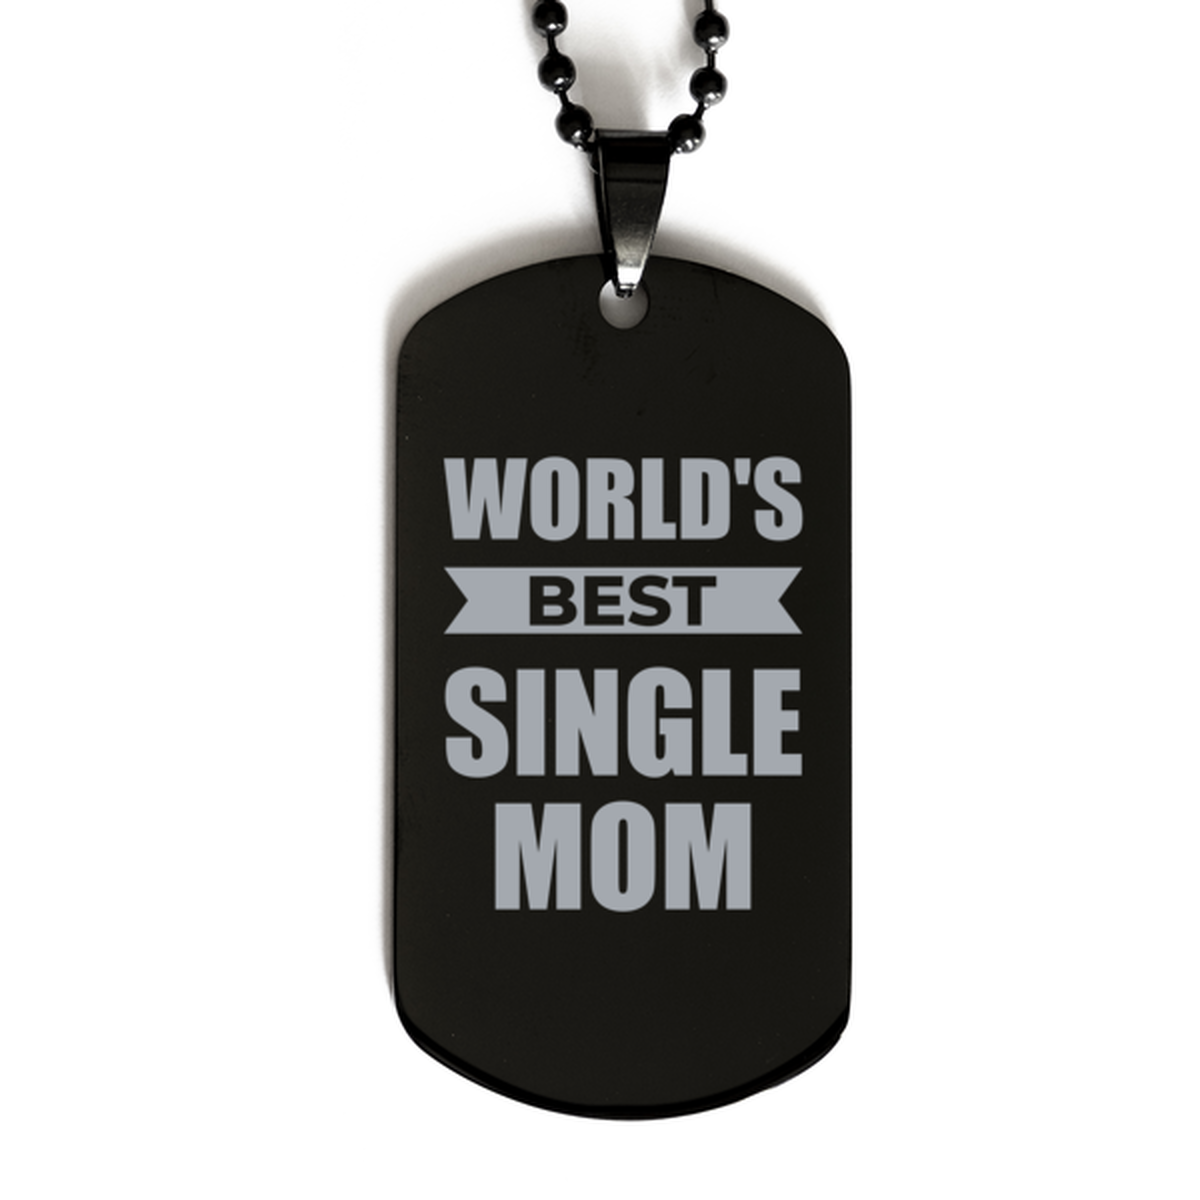 Worlds Best Single mom Gifts, Funny Black Engraved Dog Tag For Single mom, Birthday Presents For Women